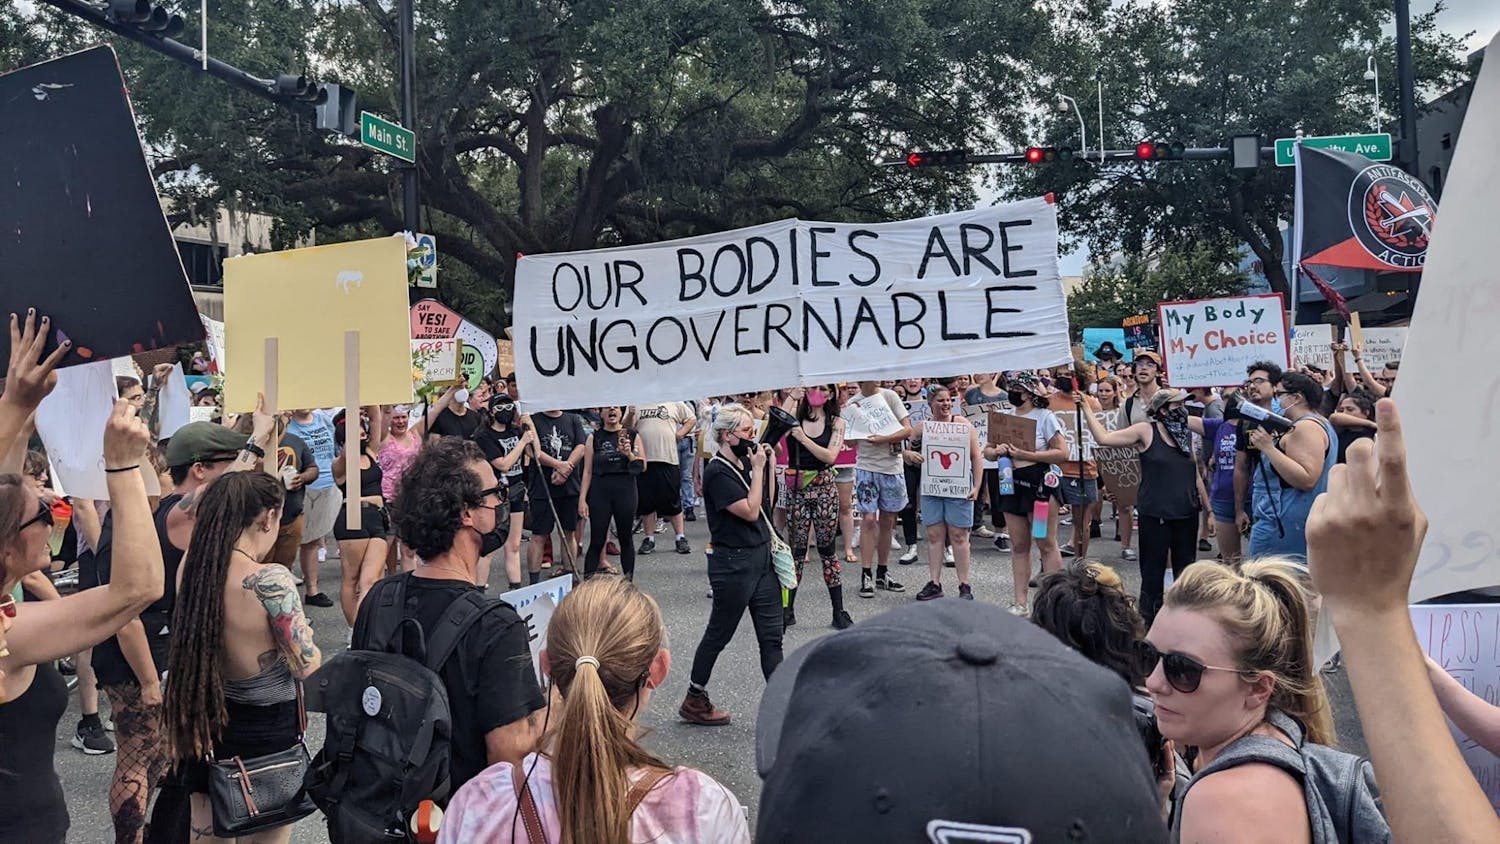 About ,1000 protestors march in Gainesville on Saturday, June 25, 2022 after the official announcement of the overturning of Roe v. Wade